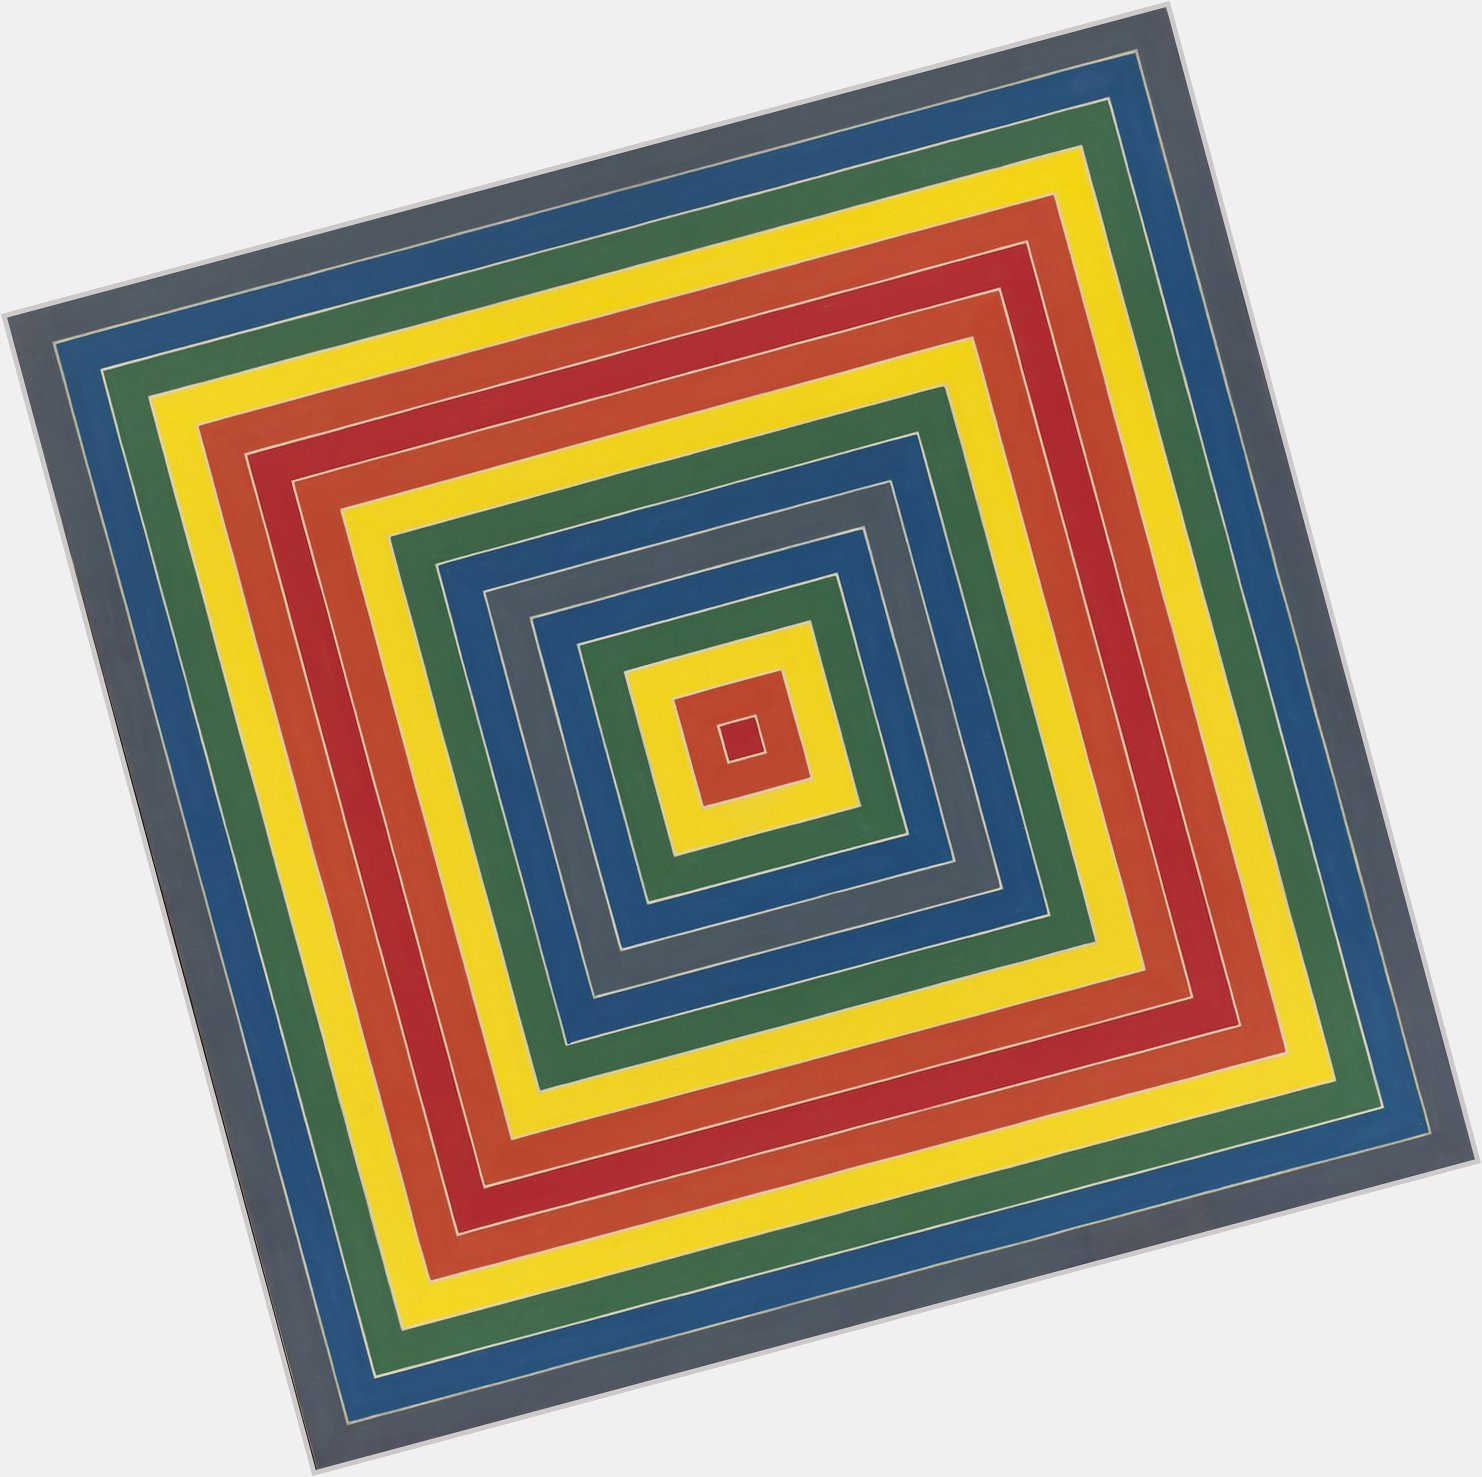 Happy Birthday to Frank Stella, born on this day in 1936:  